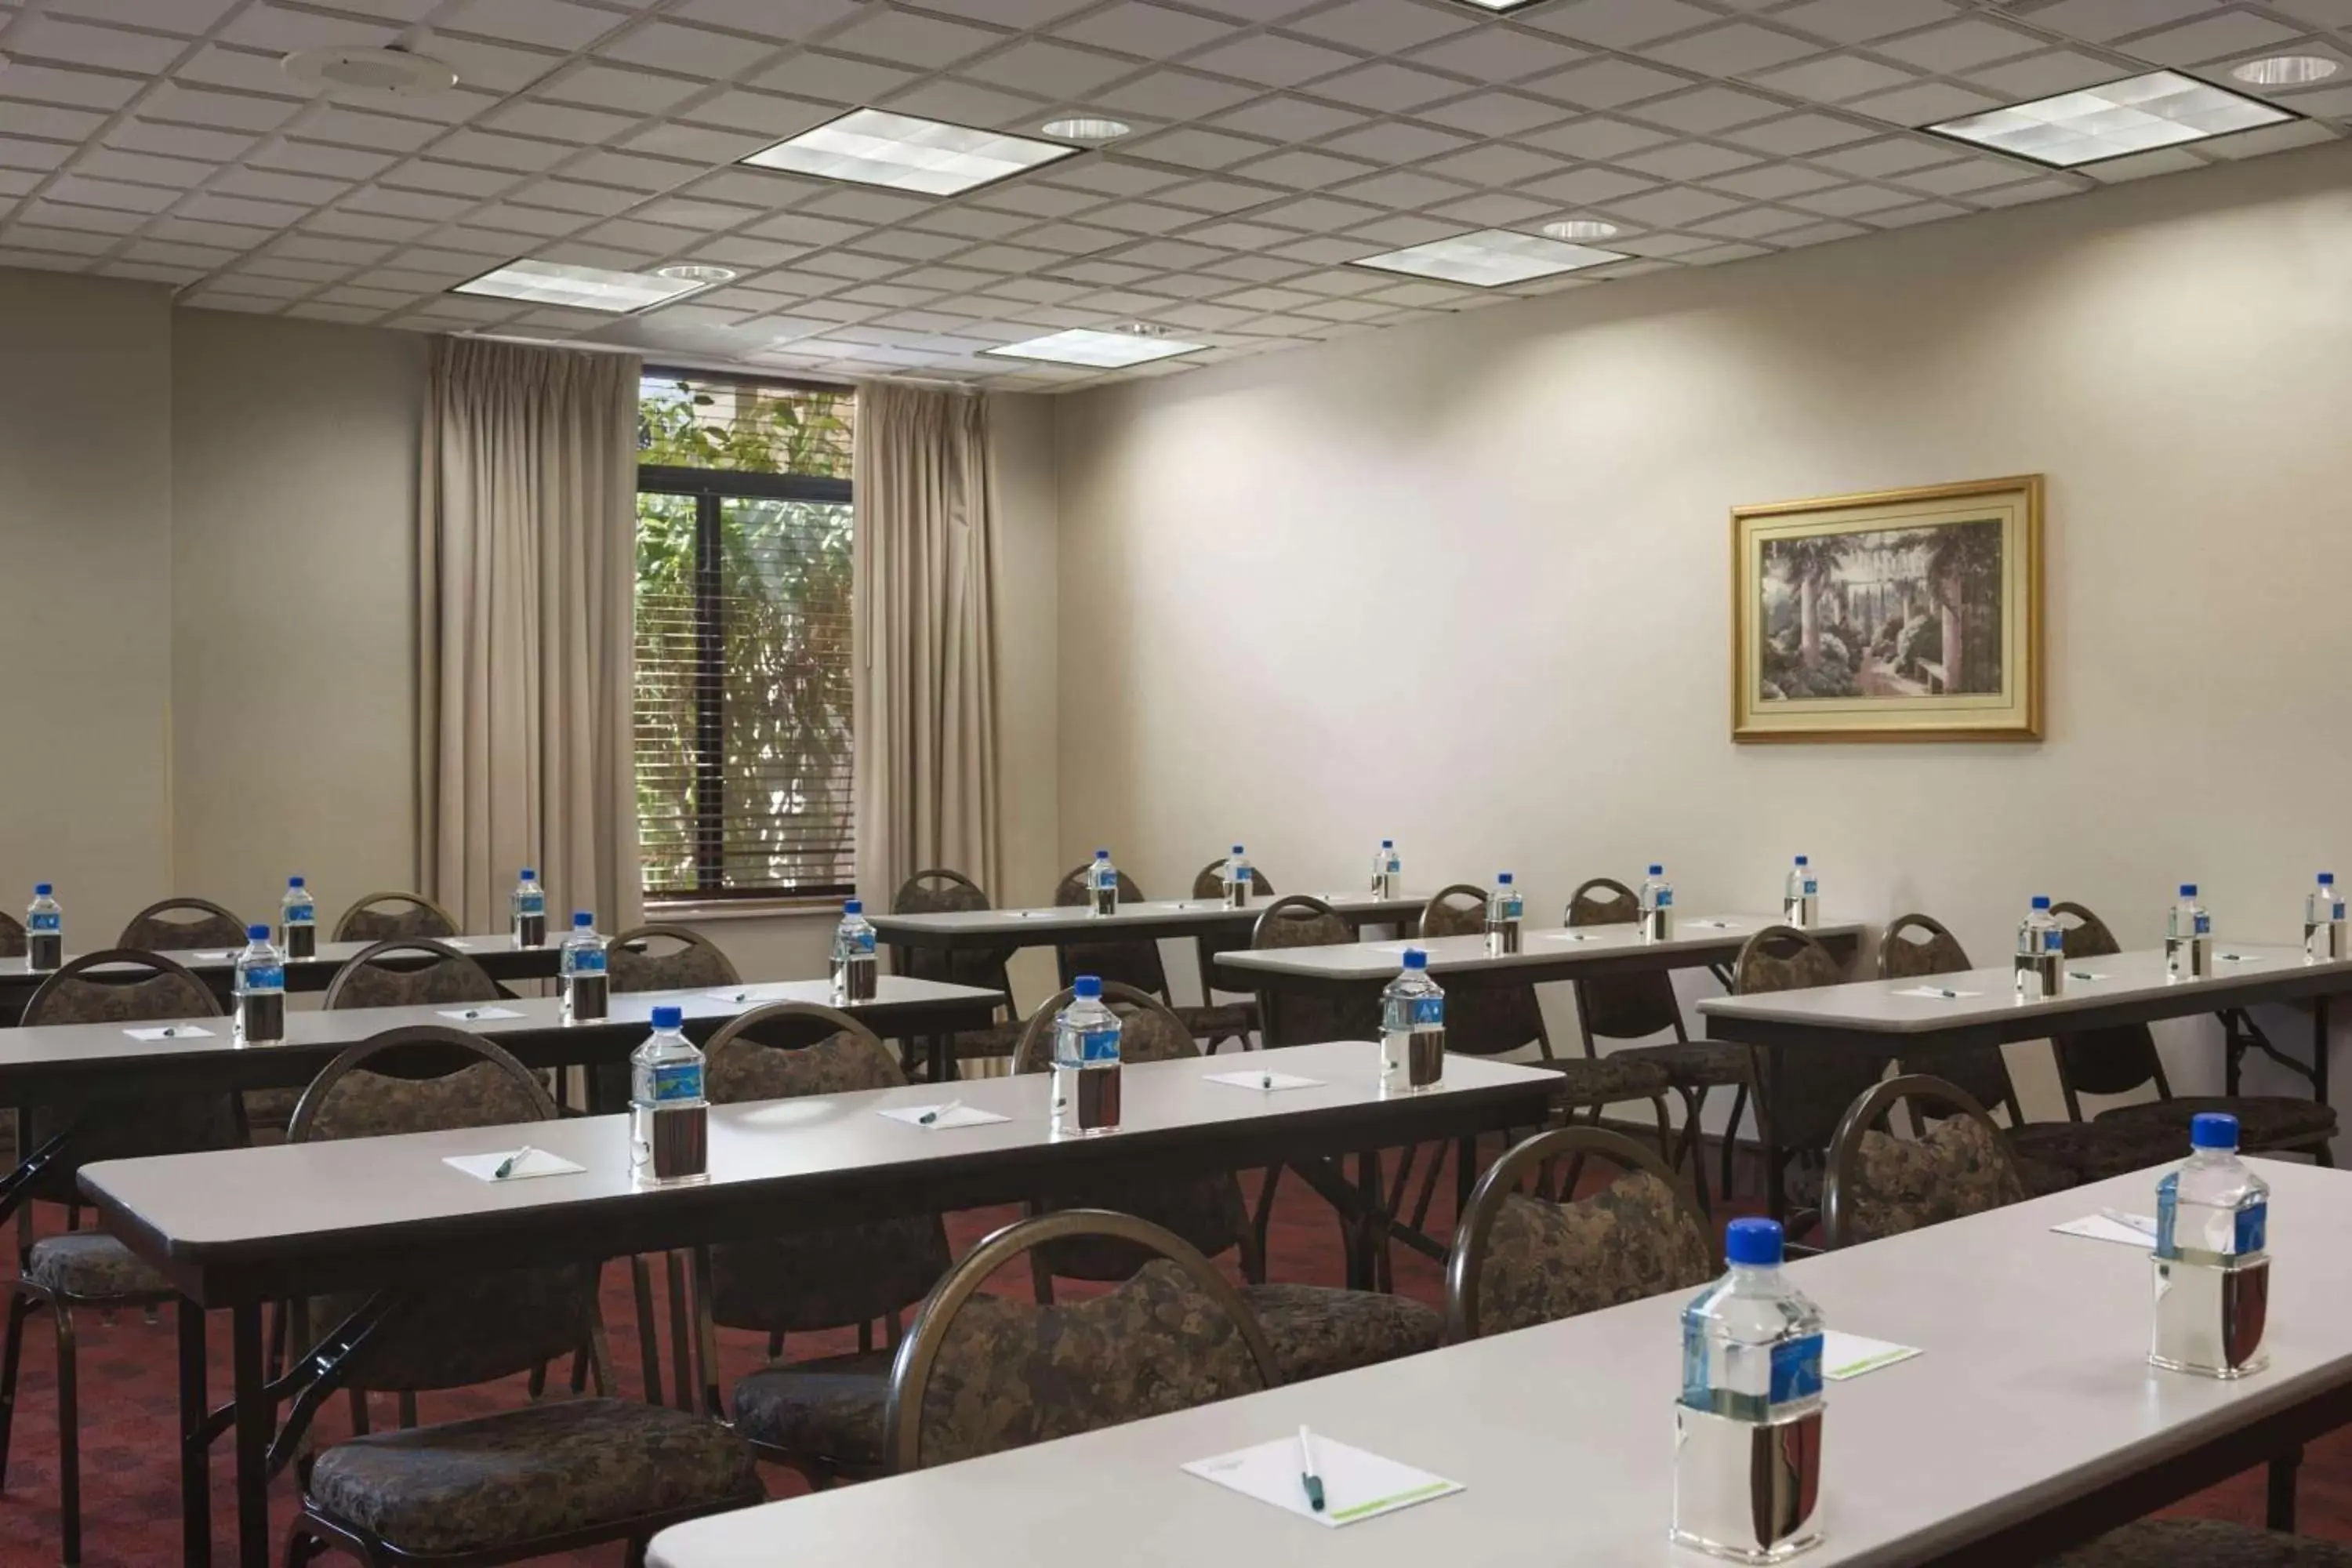 Meeting/conference room in Wingate by Wyndham Schaumburg